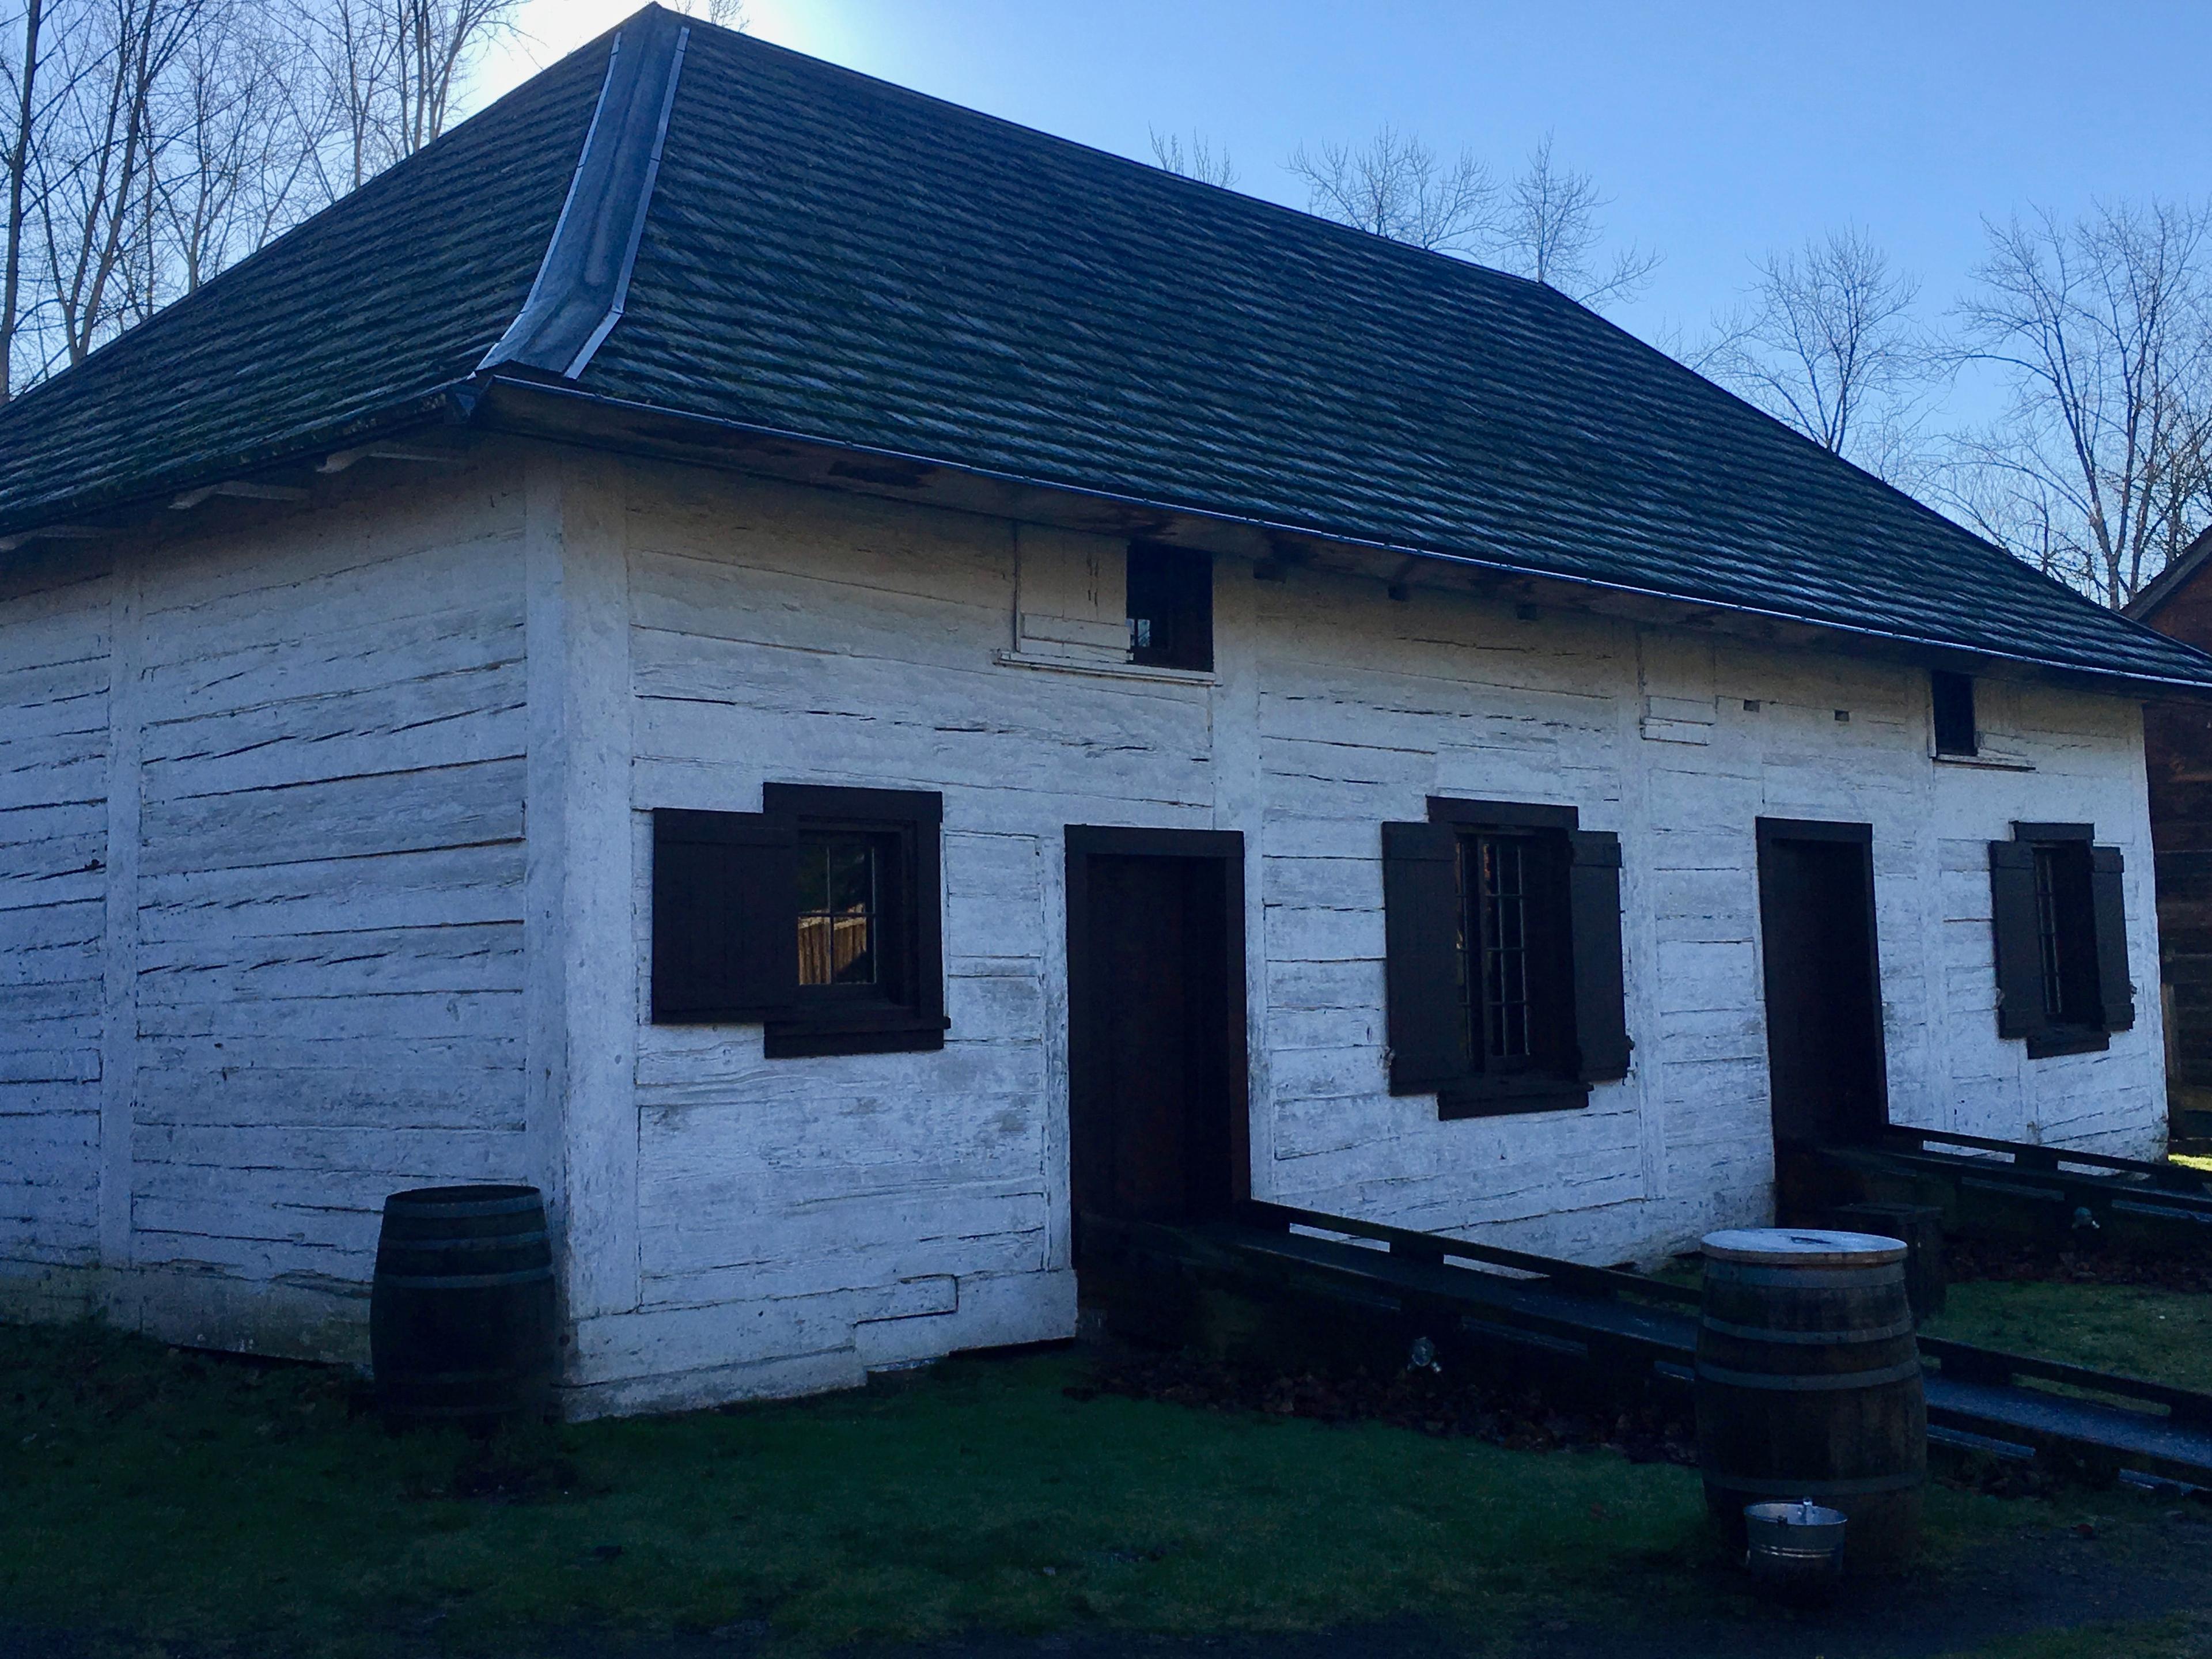 Cover image of this place Fort Langley National Historic Site